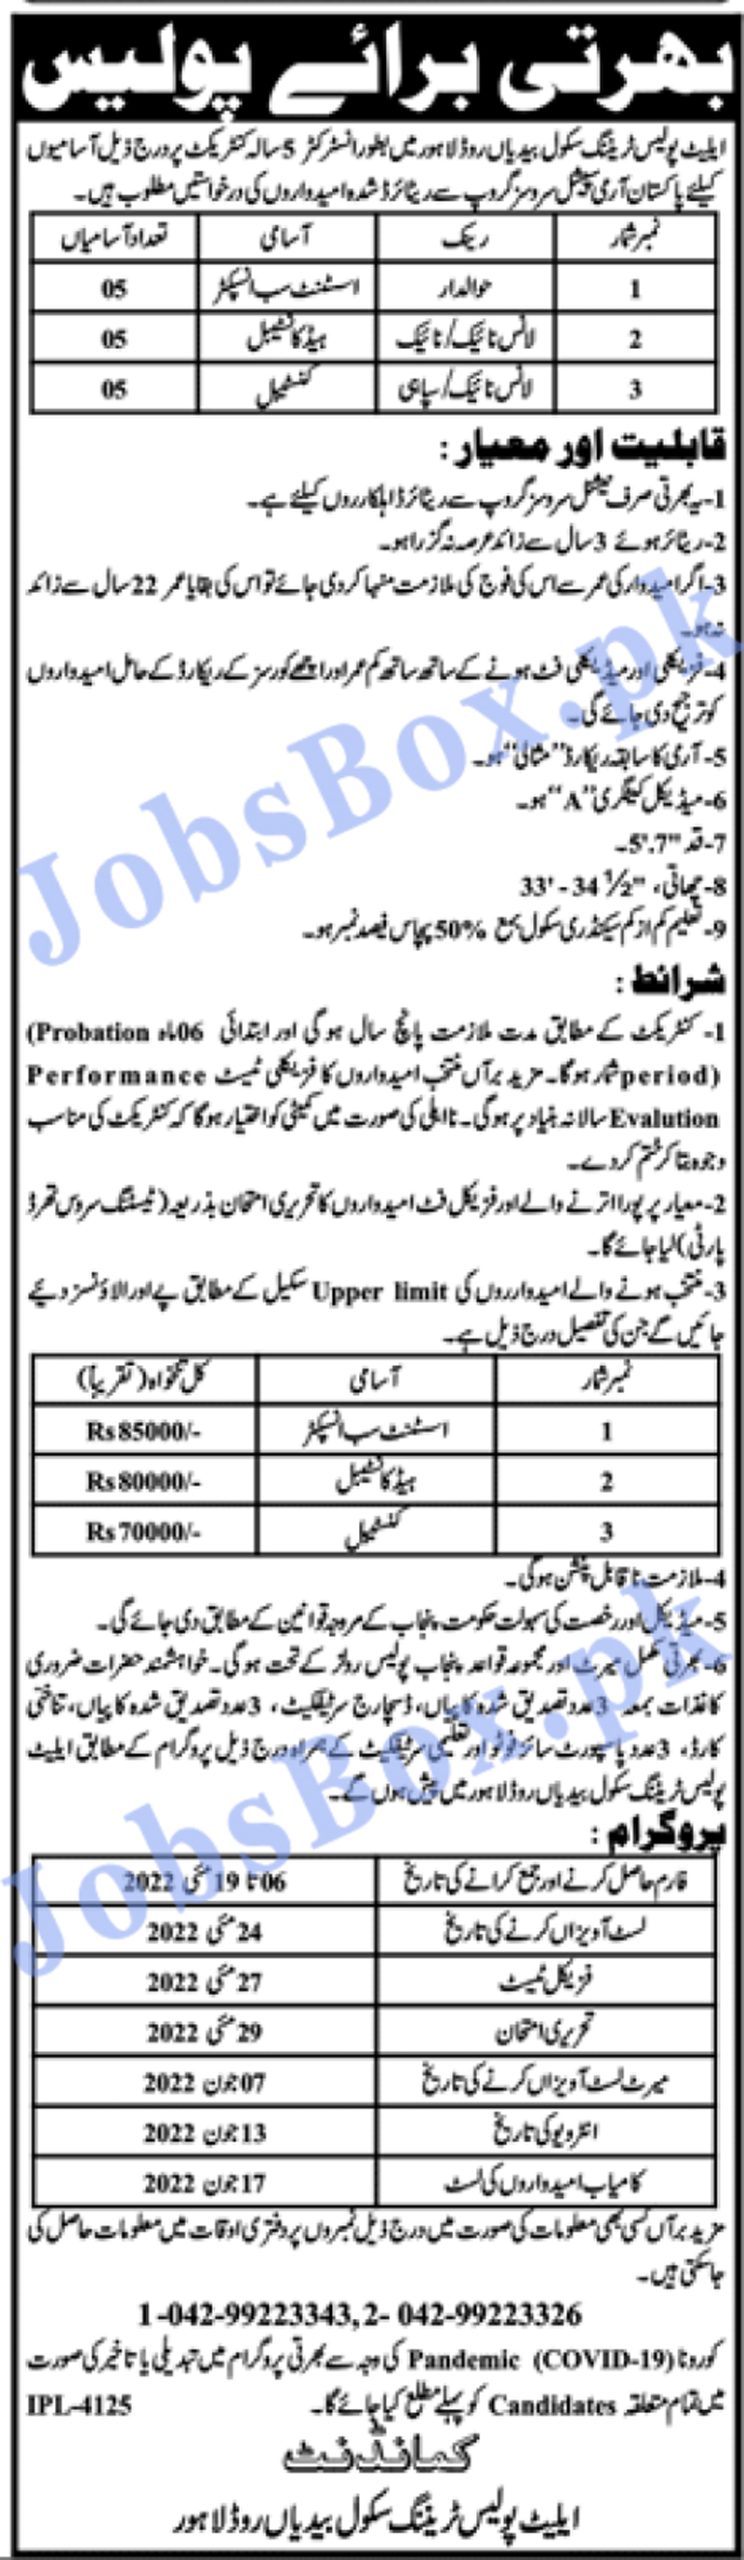 Elite Police Training School Lahore Jobs 2022 for ASI & Constables